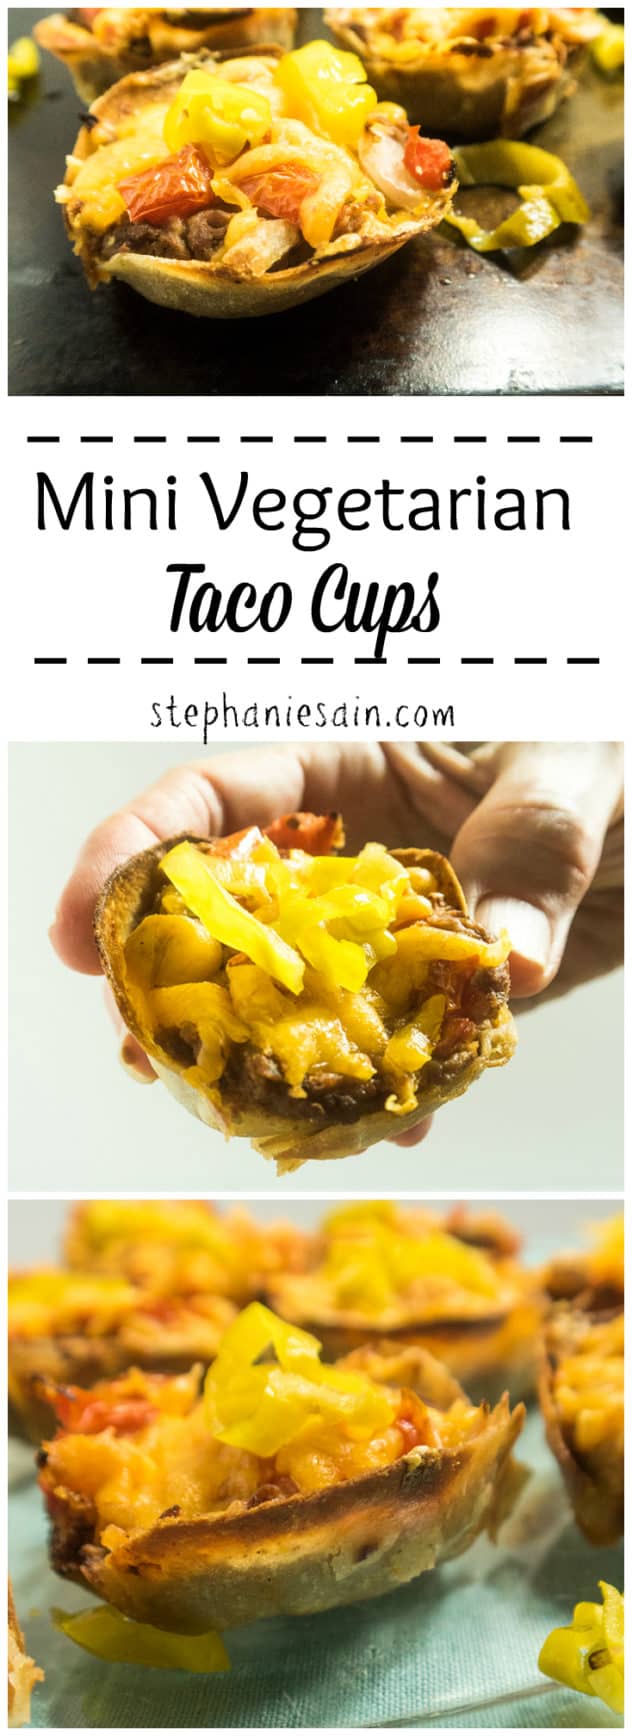 Mini Vegetarian Taco Cups are made in a muffin tin and filled with re-fried beans and then topped with your favorites. Portable, kid friendly. Gluten Free & Vegetarian.